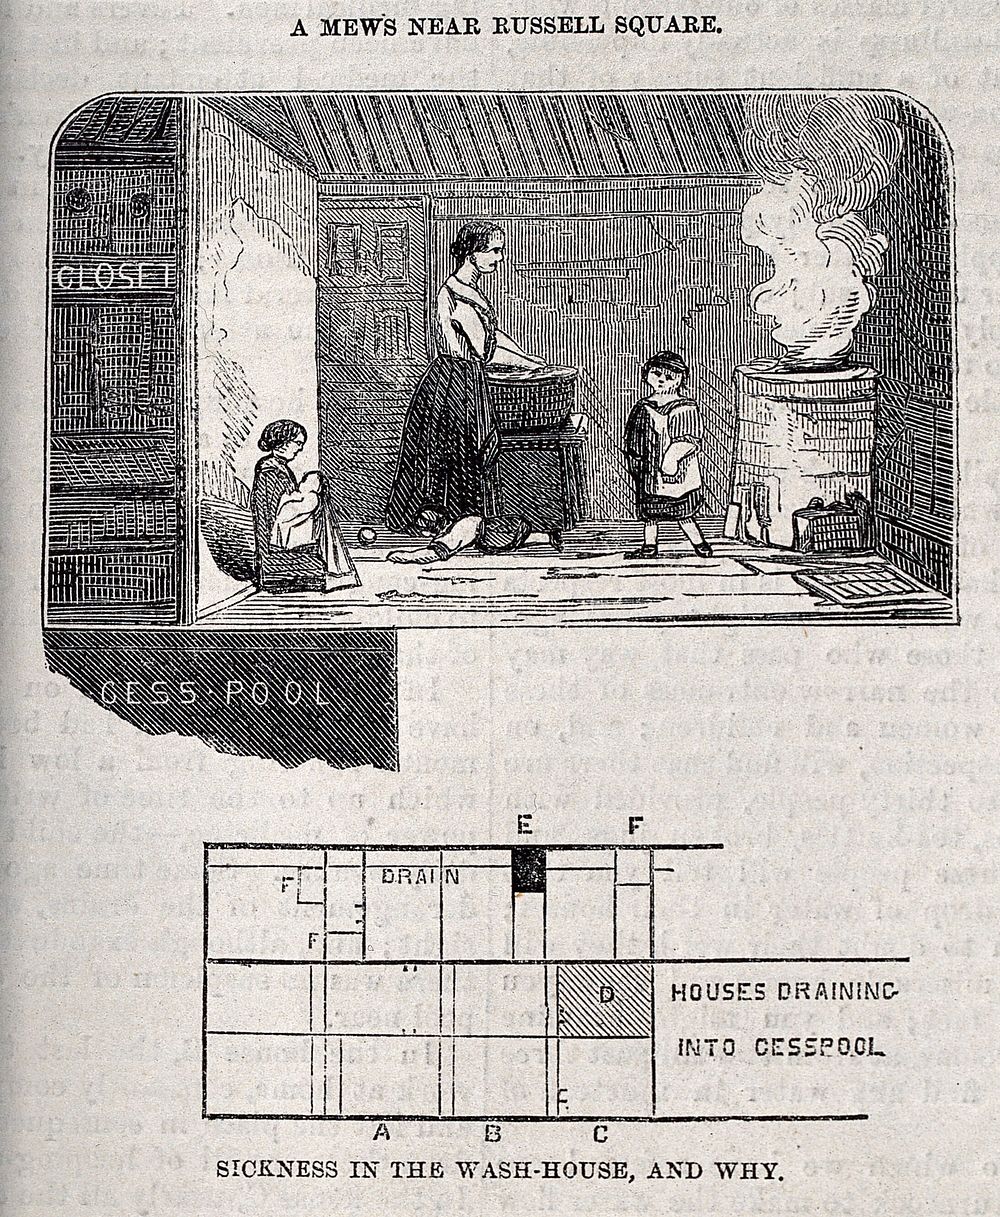 Poor sanitary conditions in London in 1862: four scenes. Wood engraving by W. E. Hodgkin, 1862.